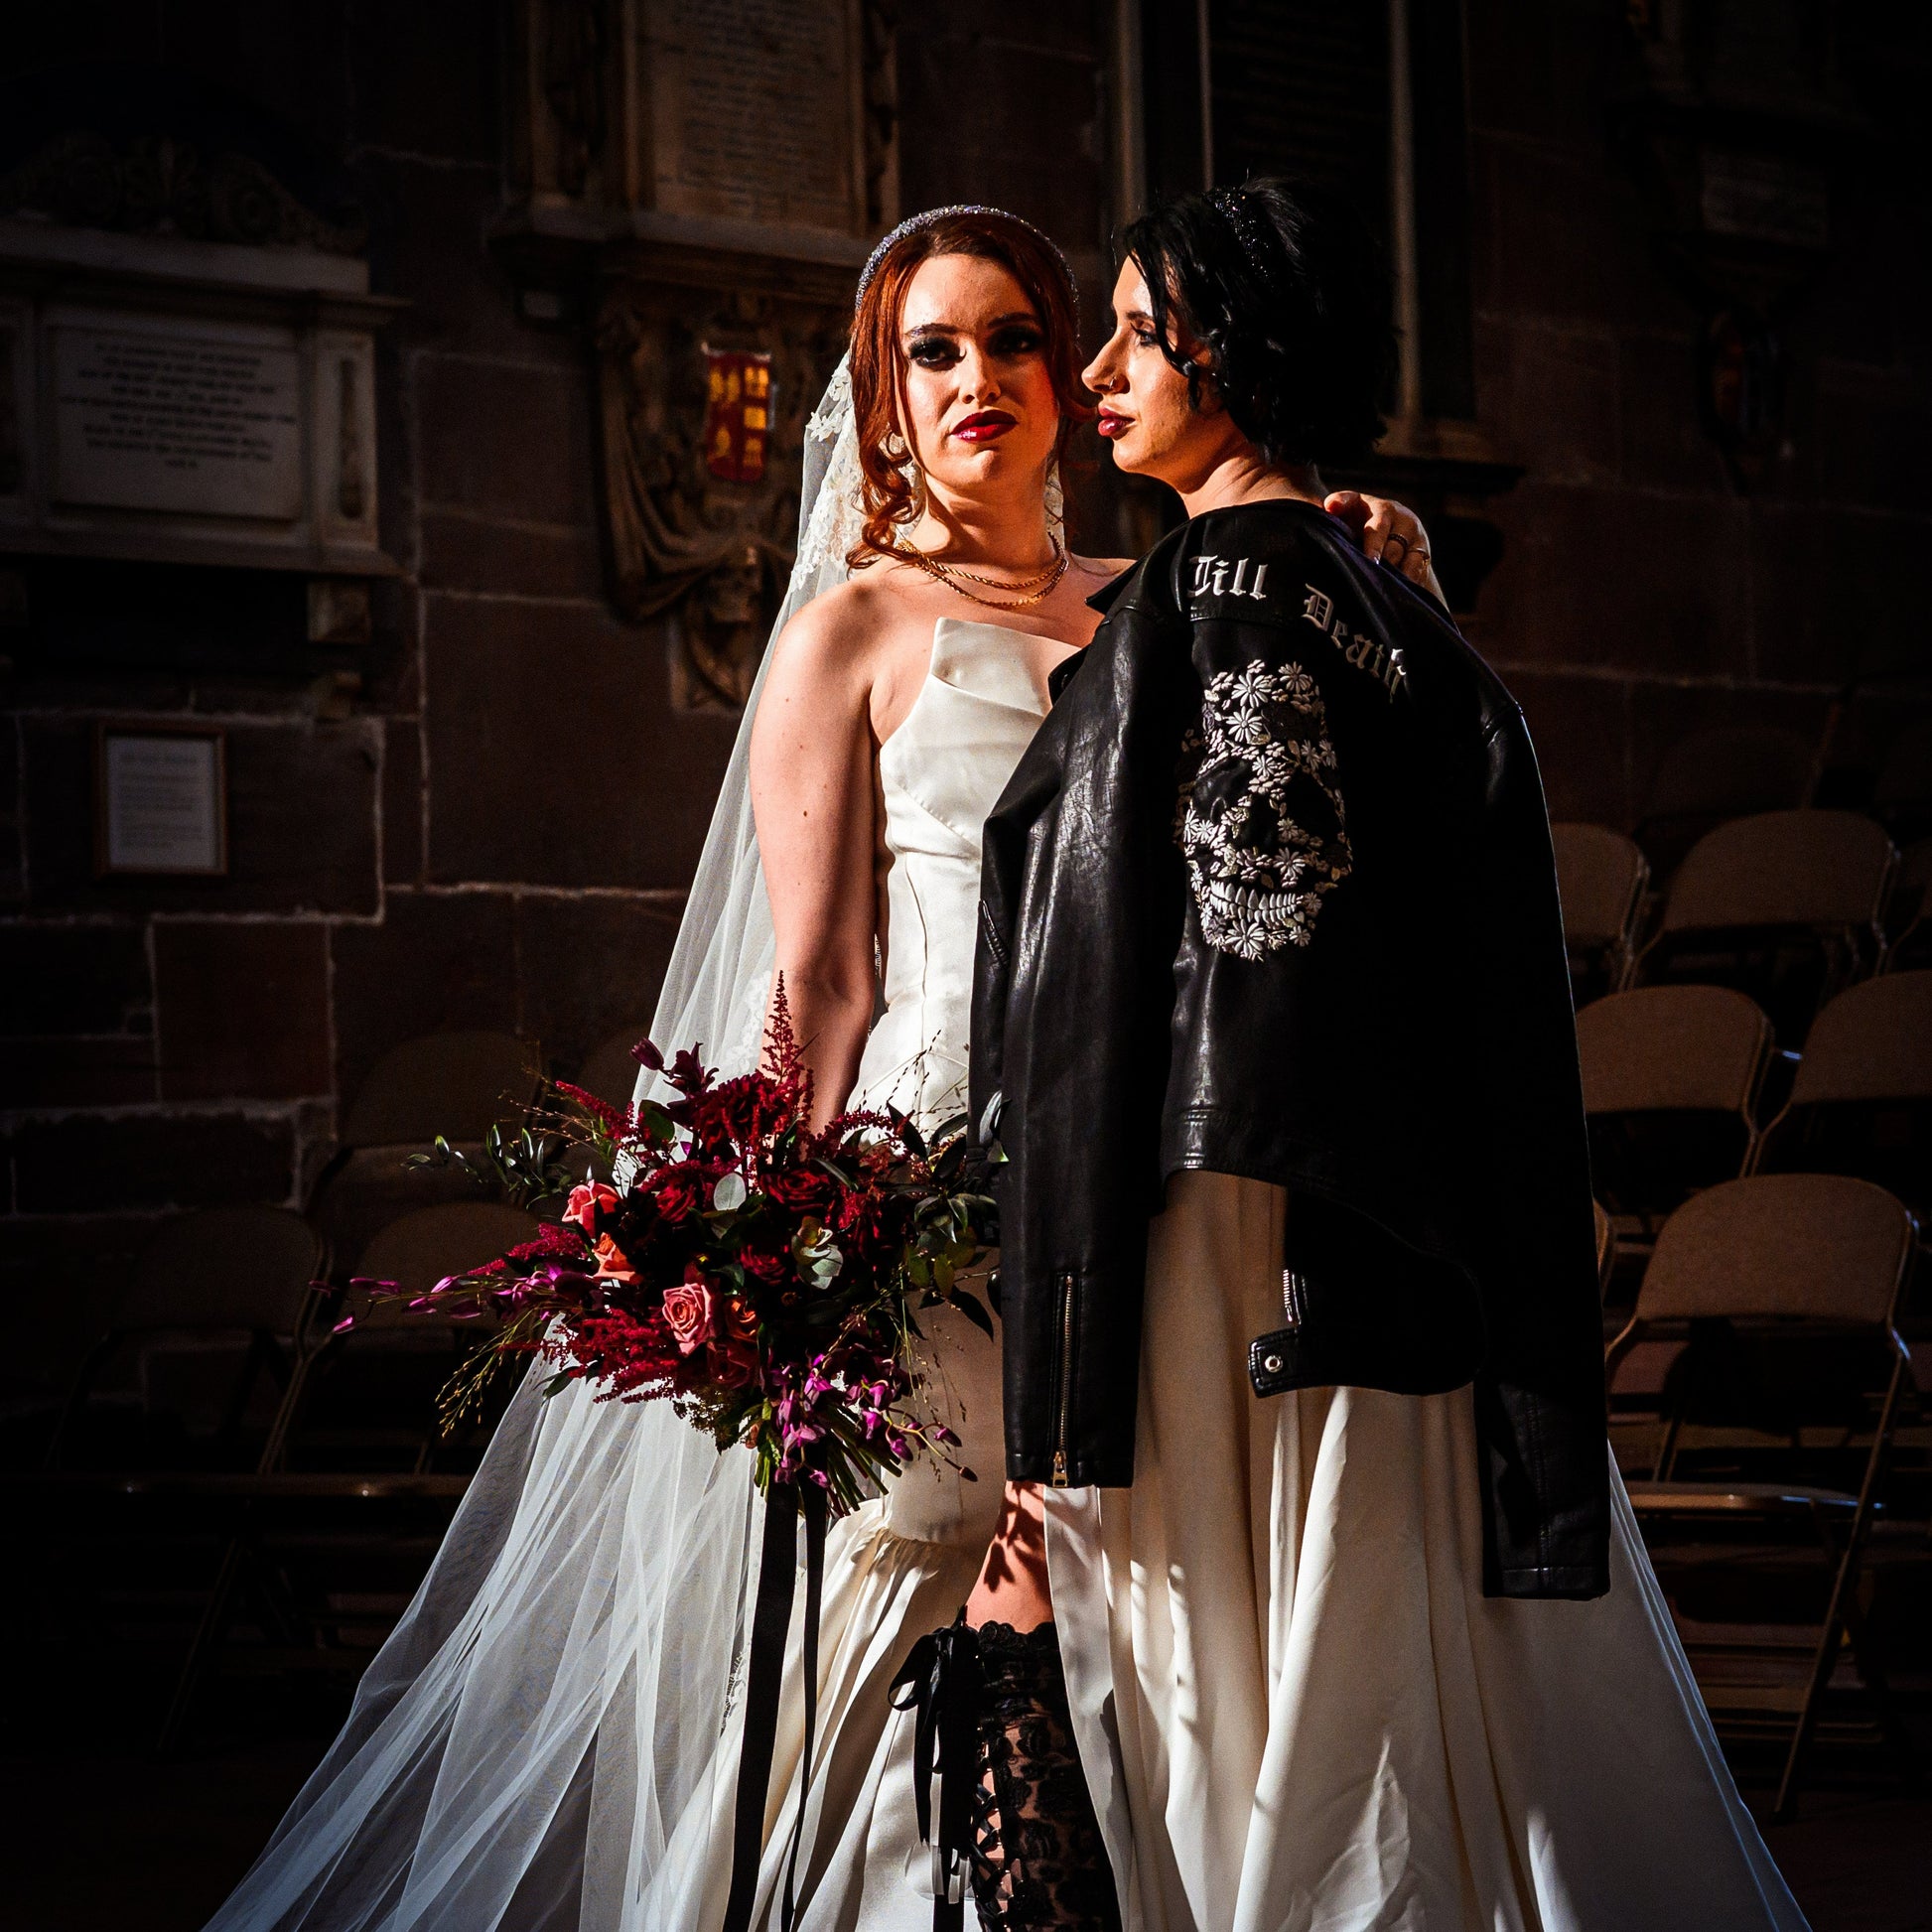 Floral Skull Till Death Bride-themed Bridal Cover-Up – a black leather jacket for a bold and stylish wedding statement